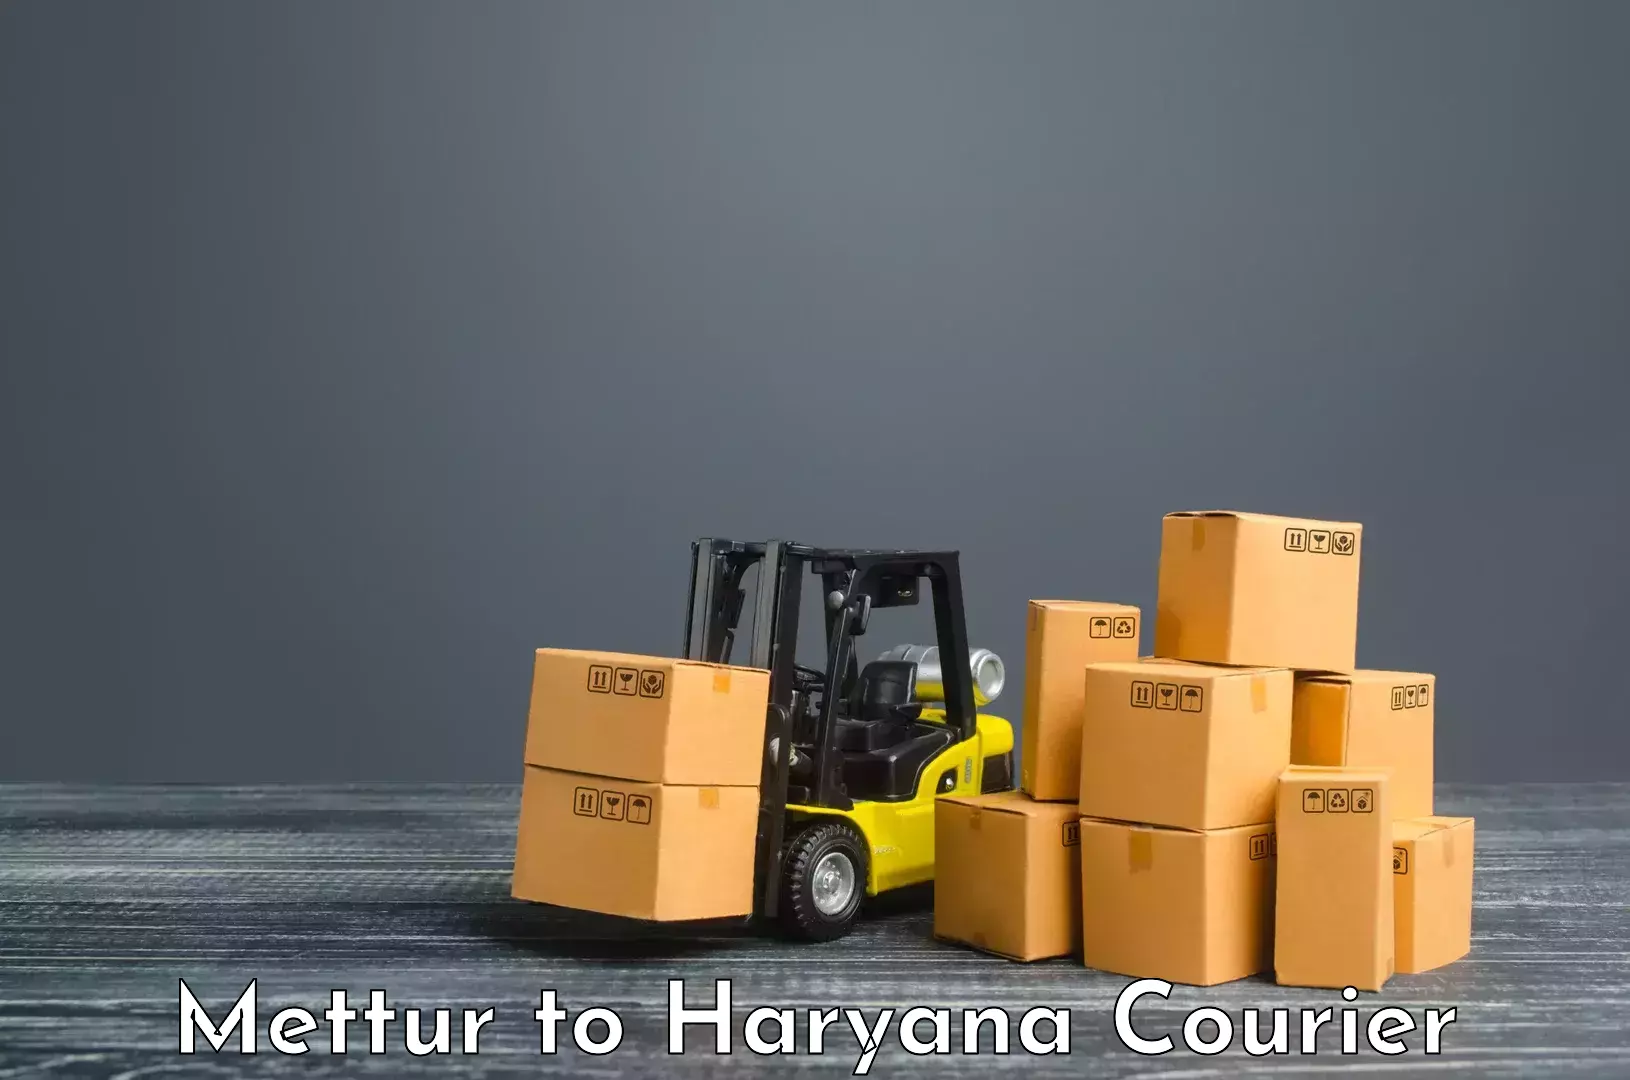 Nationwide parcel services Mettur to Haryana